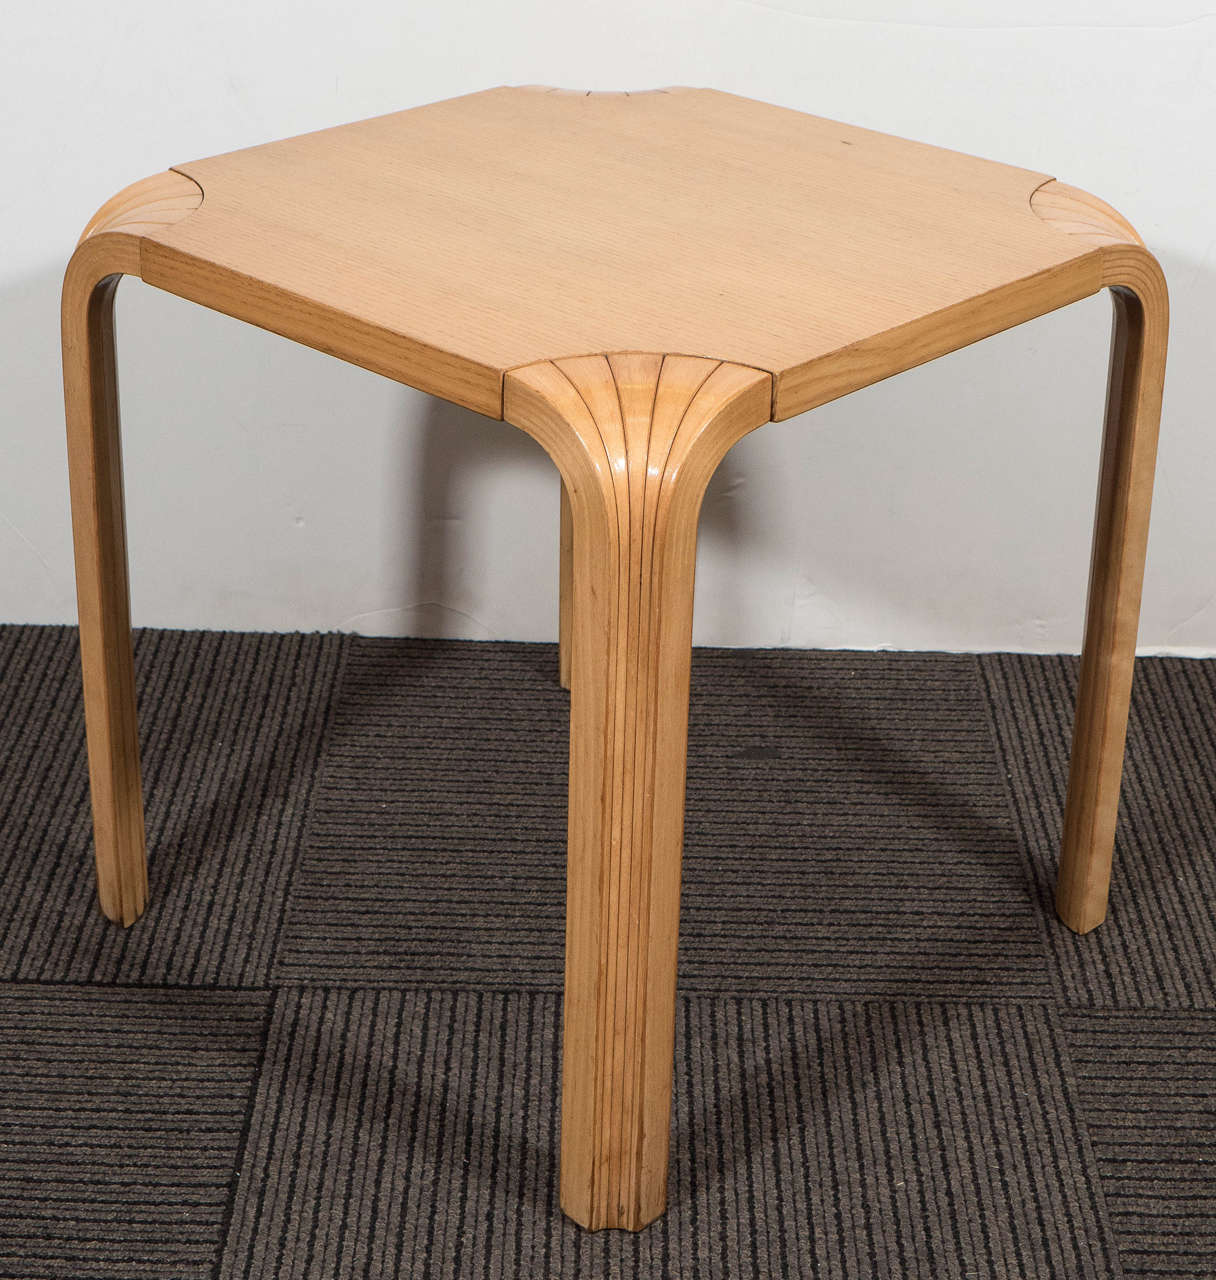 A vintage birch wood side table on 'fan legs,' 23 by Finnish designer Alvar Aalto, circa 1960s for ICF Group. Markings include original label [ICF], underneath the table top. Very good vintage condition with age appropriate wear.